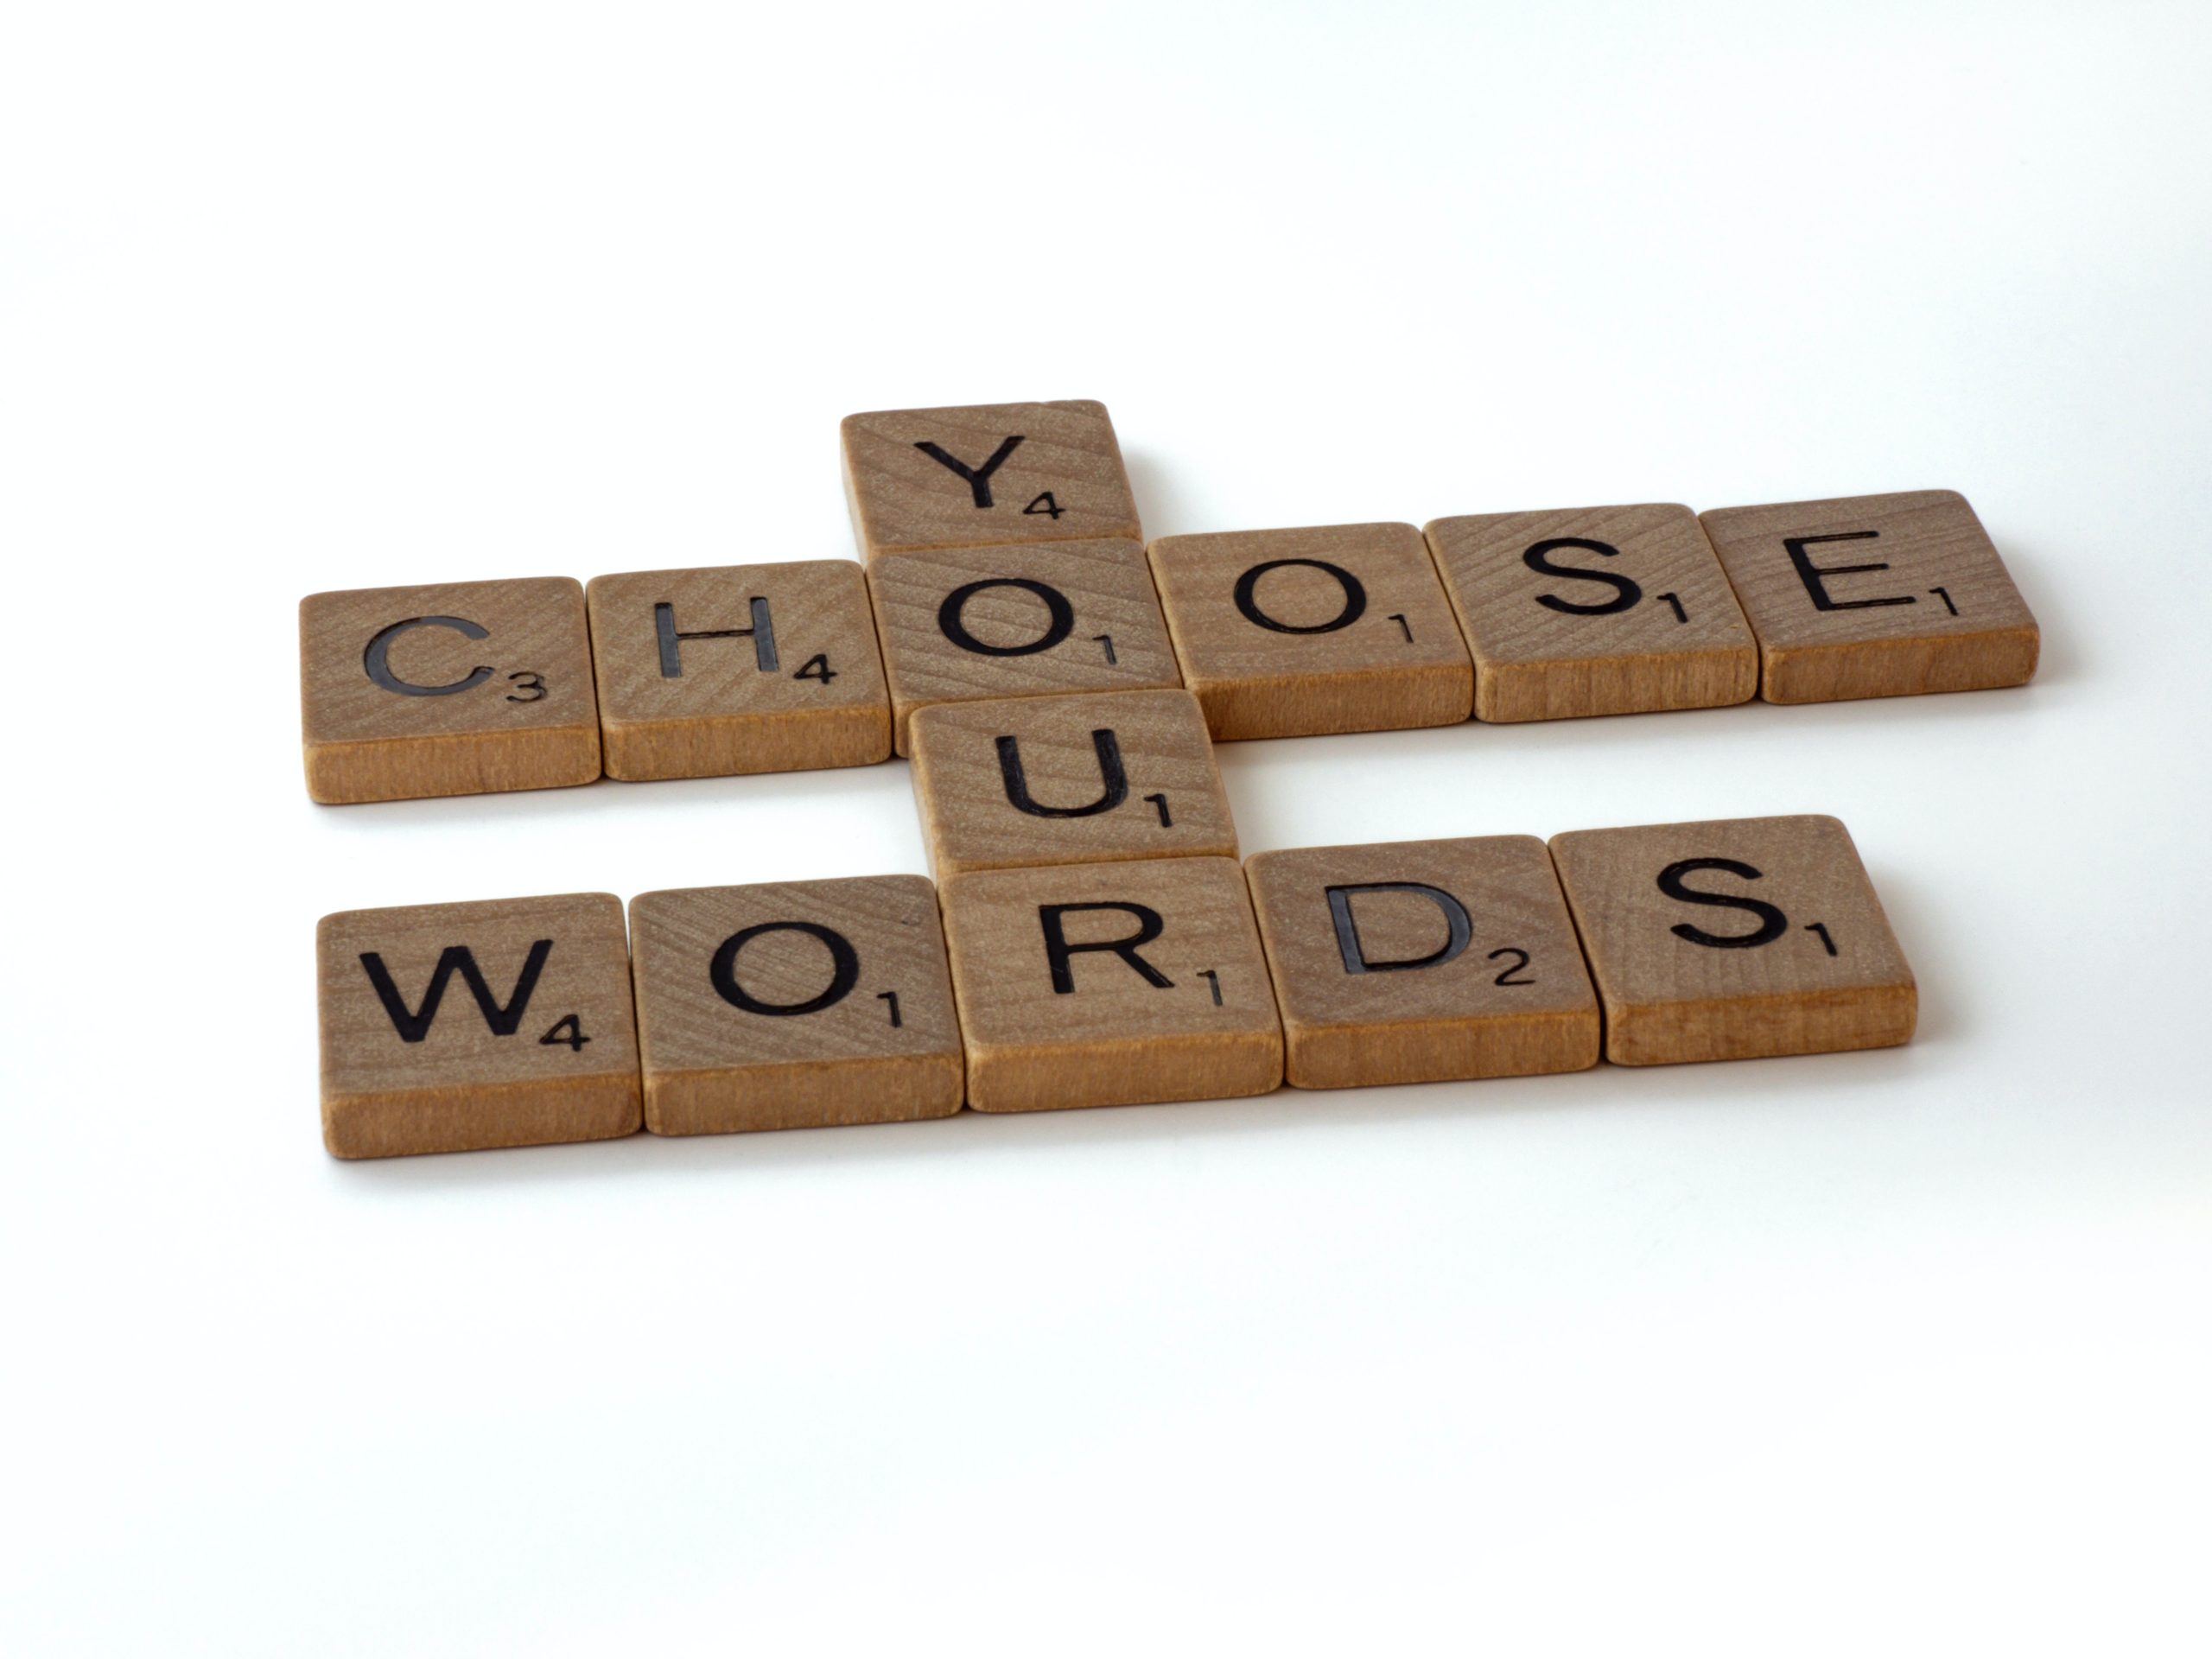 “Choose your words” spelled out in wooden tiles arranged on a table